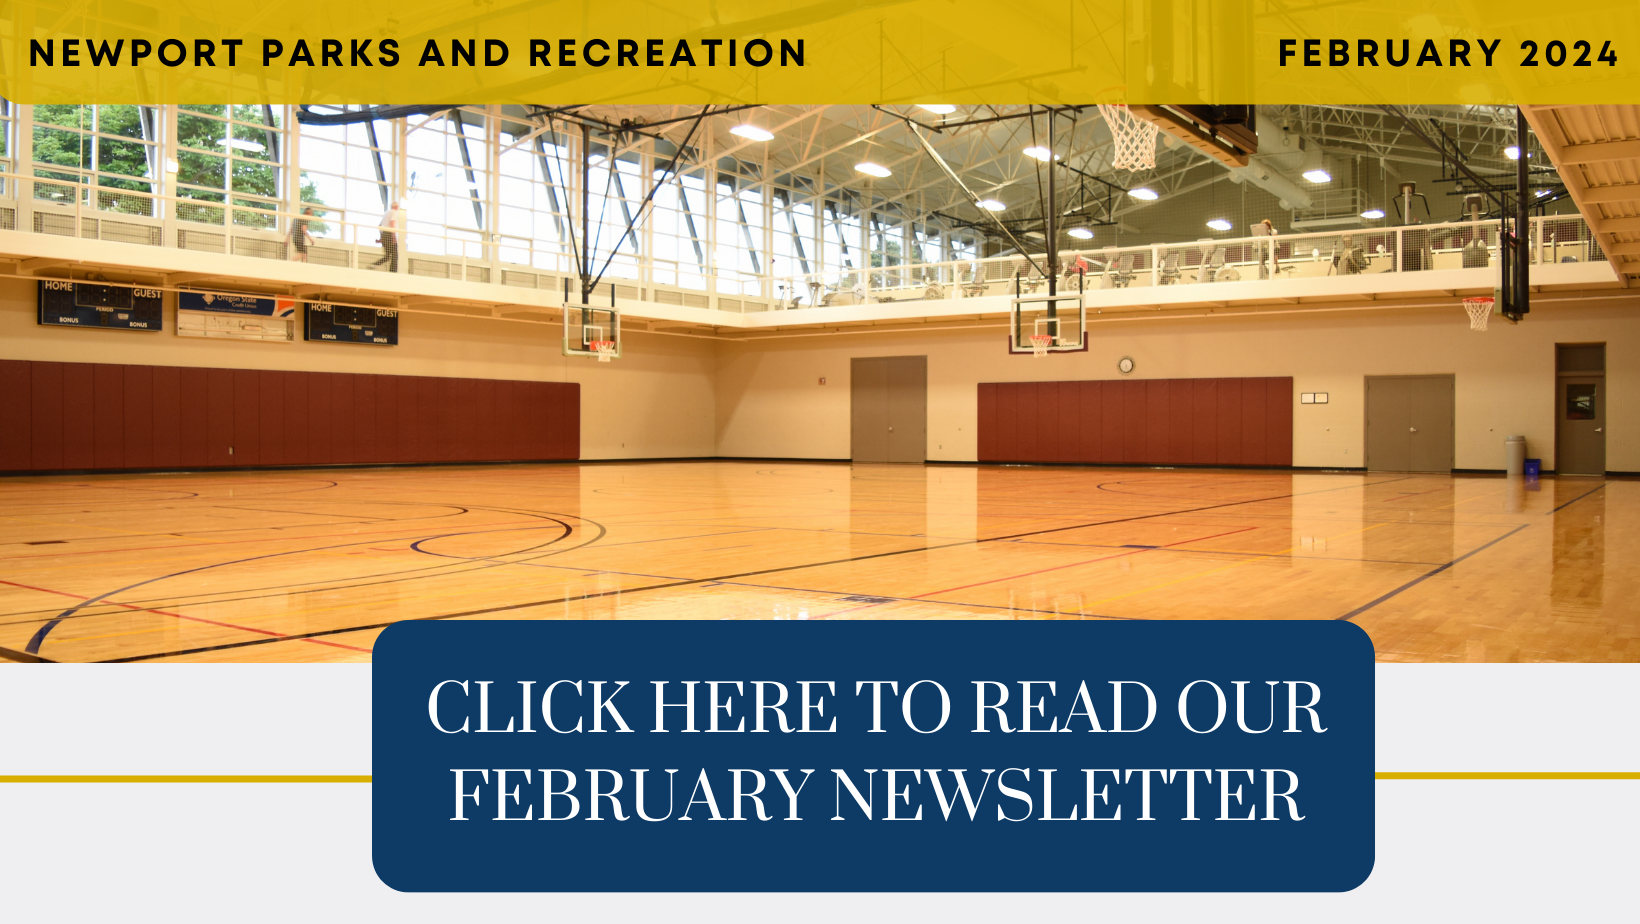 click here to read our Feb newsletter